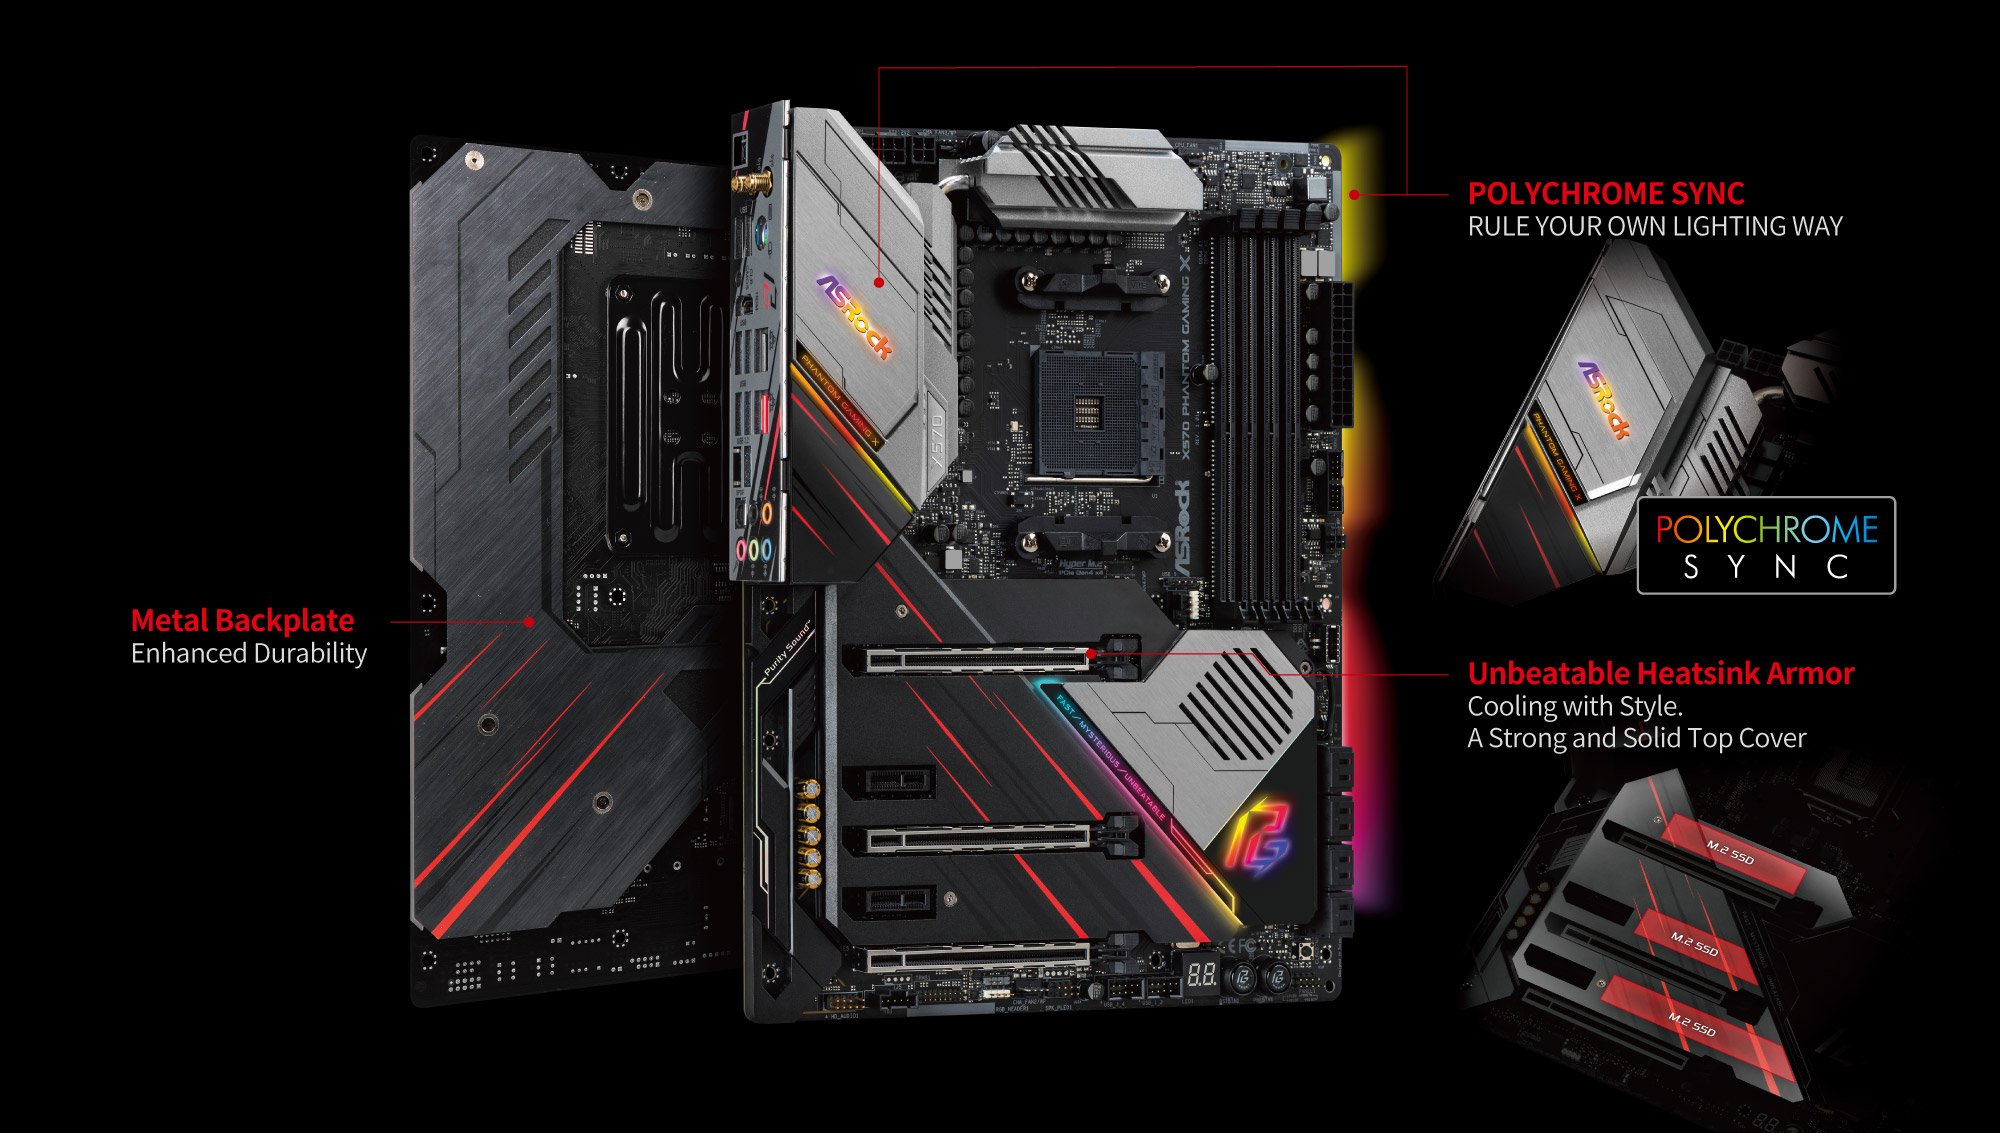 Two ASRock X570 Phantom Gaming X Motherboard Back to Back along with text and graphics pointing out the following features: Metal backplate for enhanced durability, Polychrome Sync to rule your own lighting way and unbeatable heatsink armor to cool with style via this strong and solid top cover